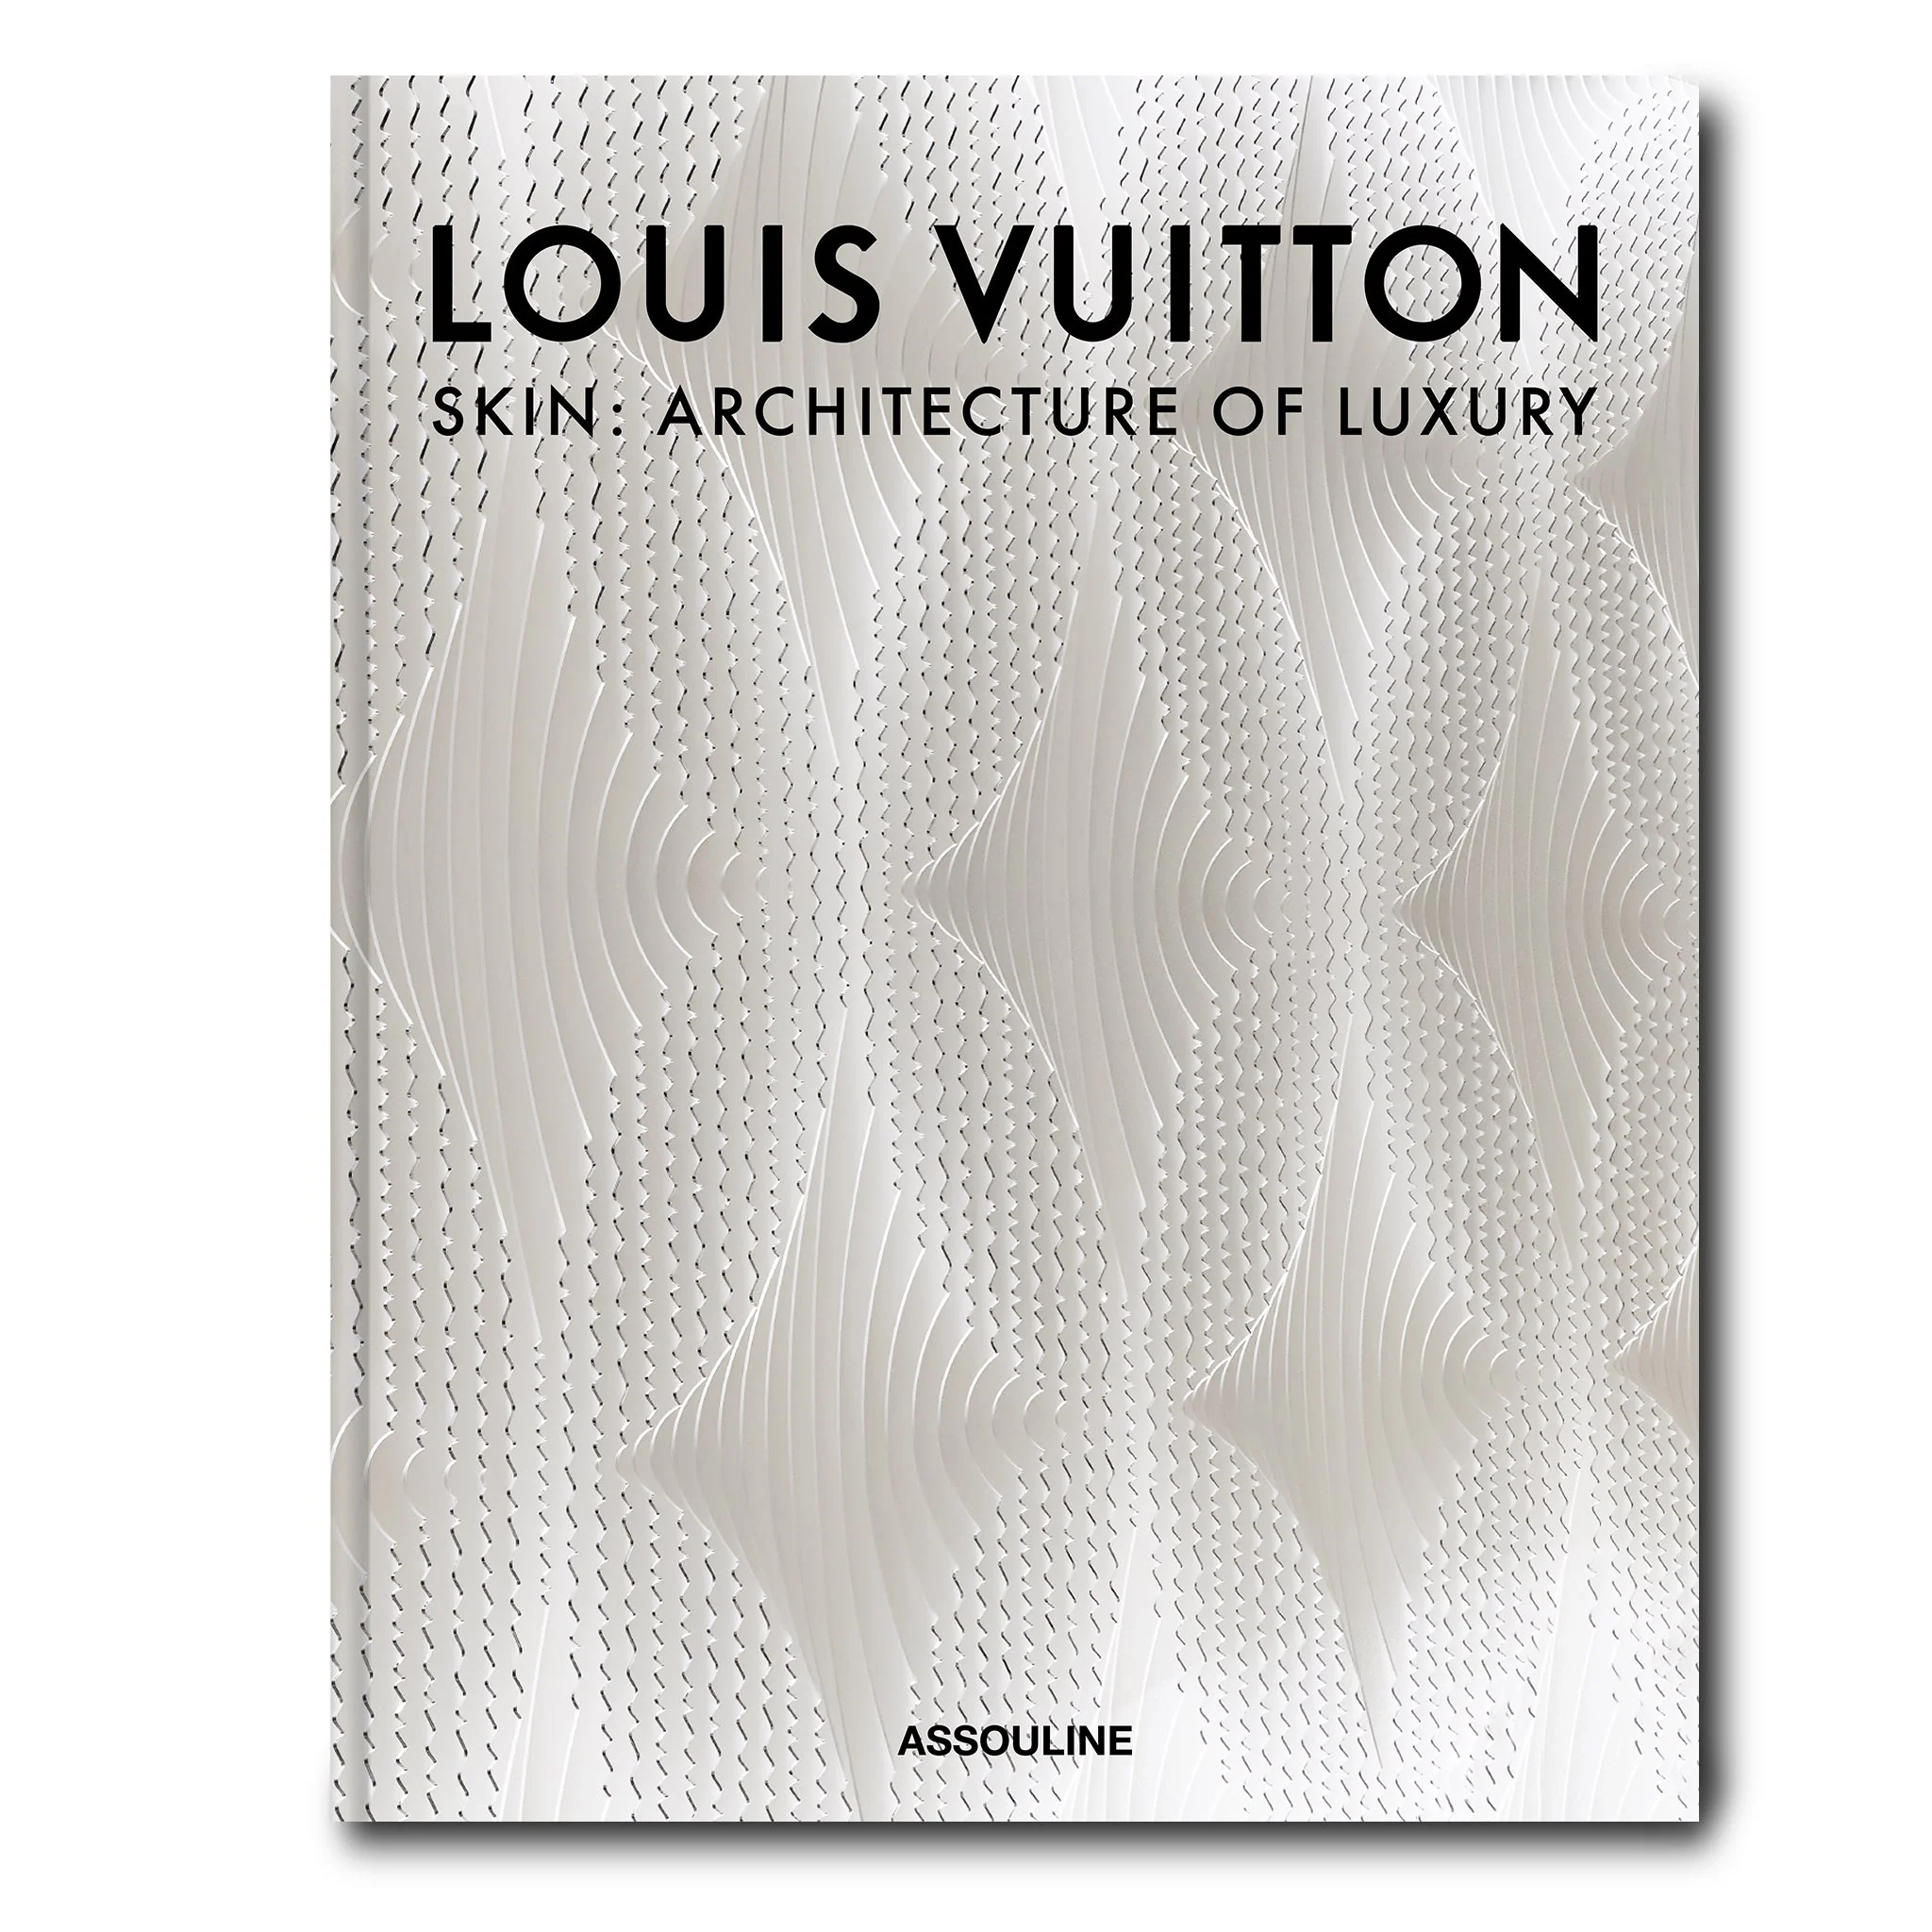 Louis Vuitton Skin: The Architecture of Luxury (New York Edition)